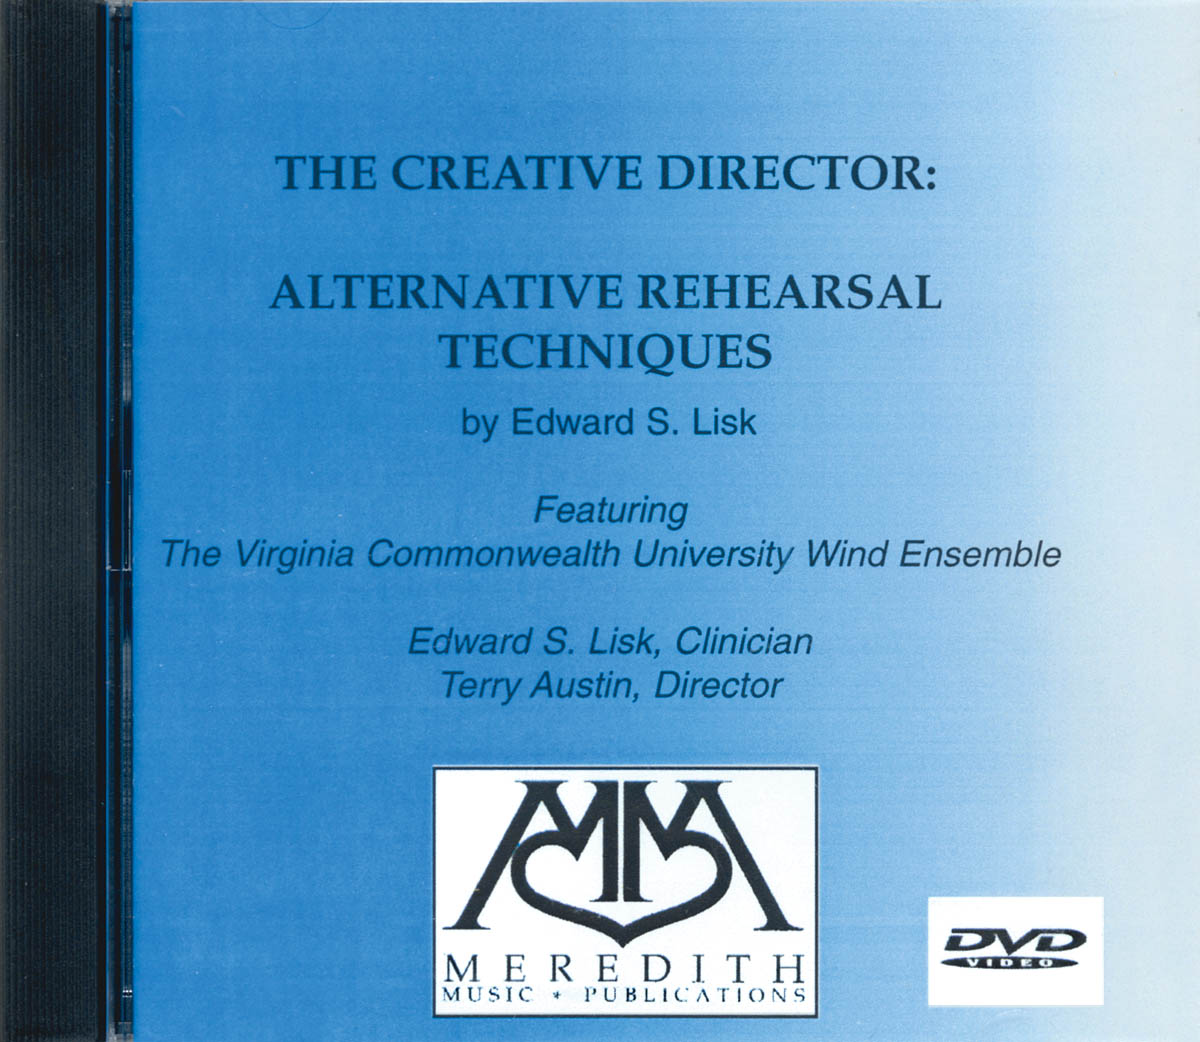 The Creative Director: Reference Books: DVD